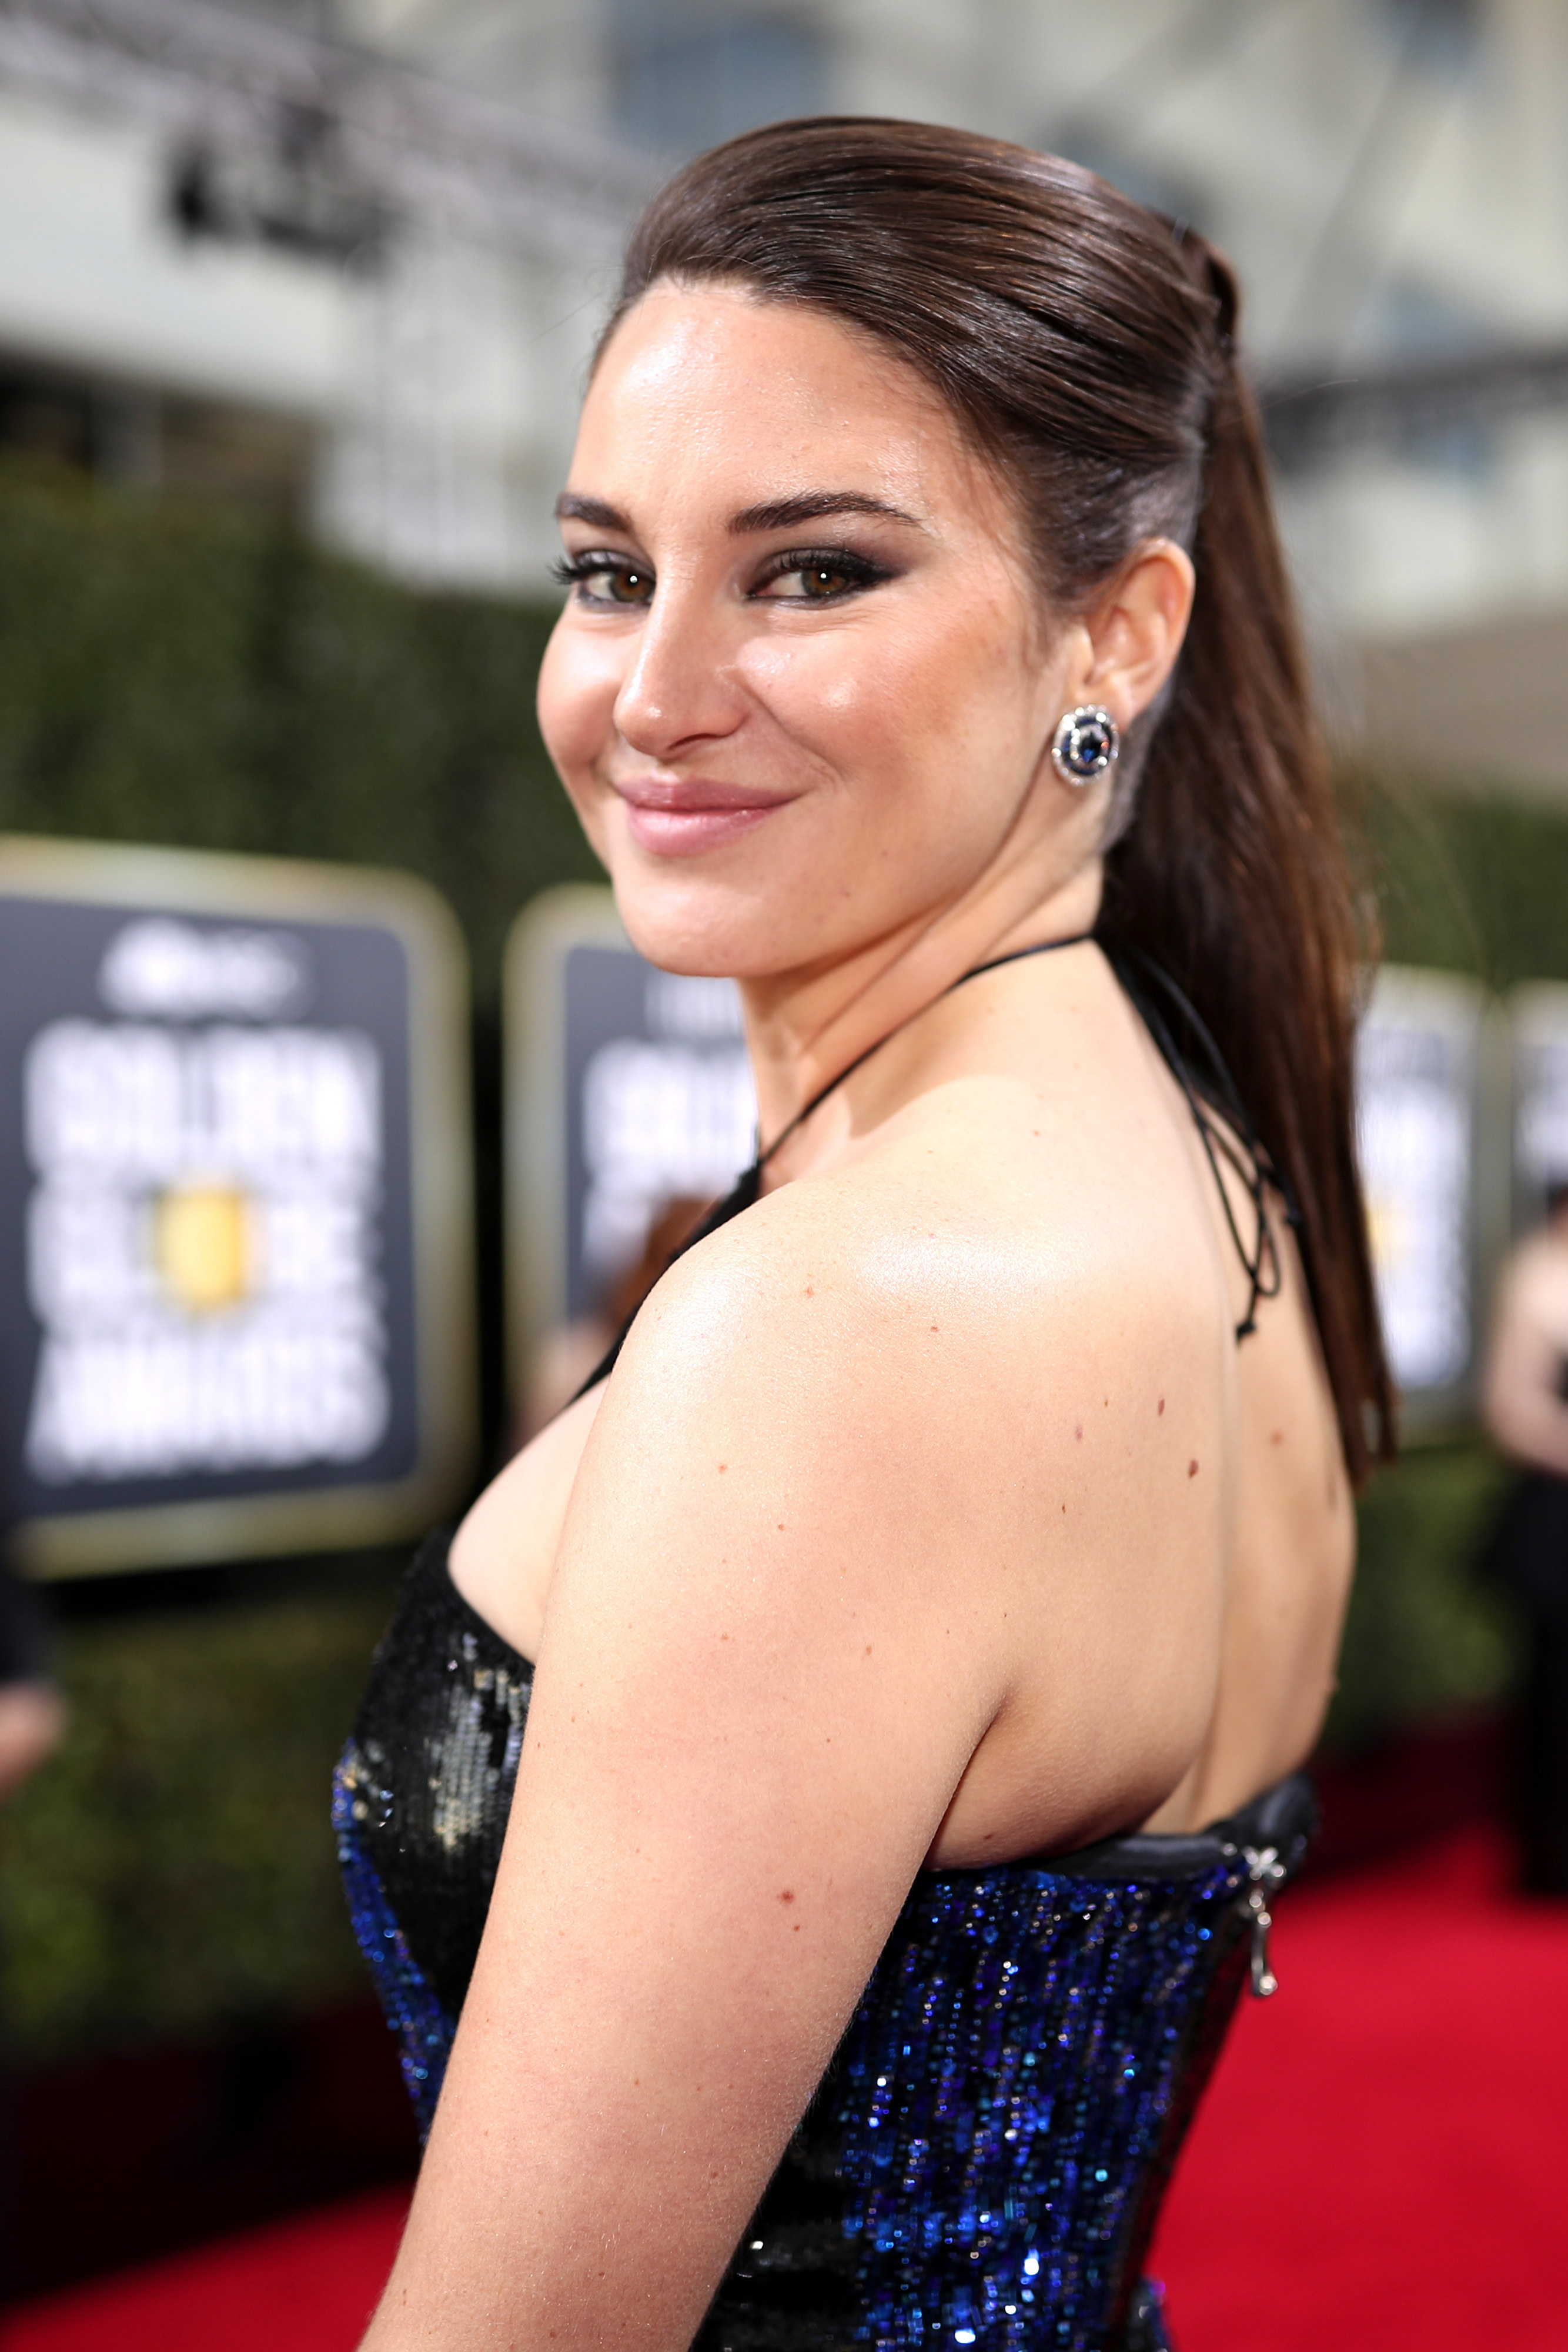 Shailene Woodley is pictured on the red carpet at the Golden Globe Awards in 2020